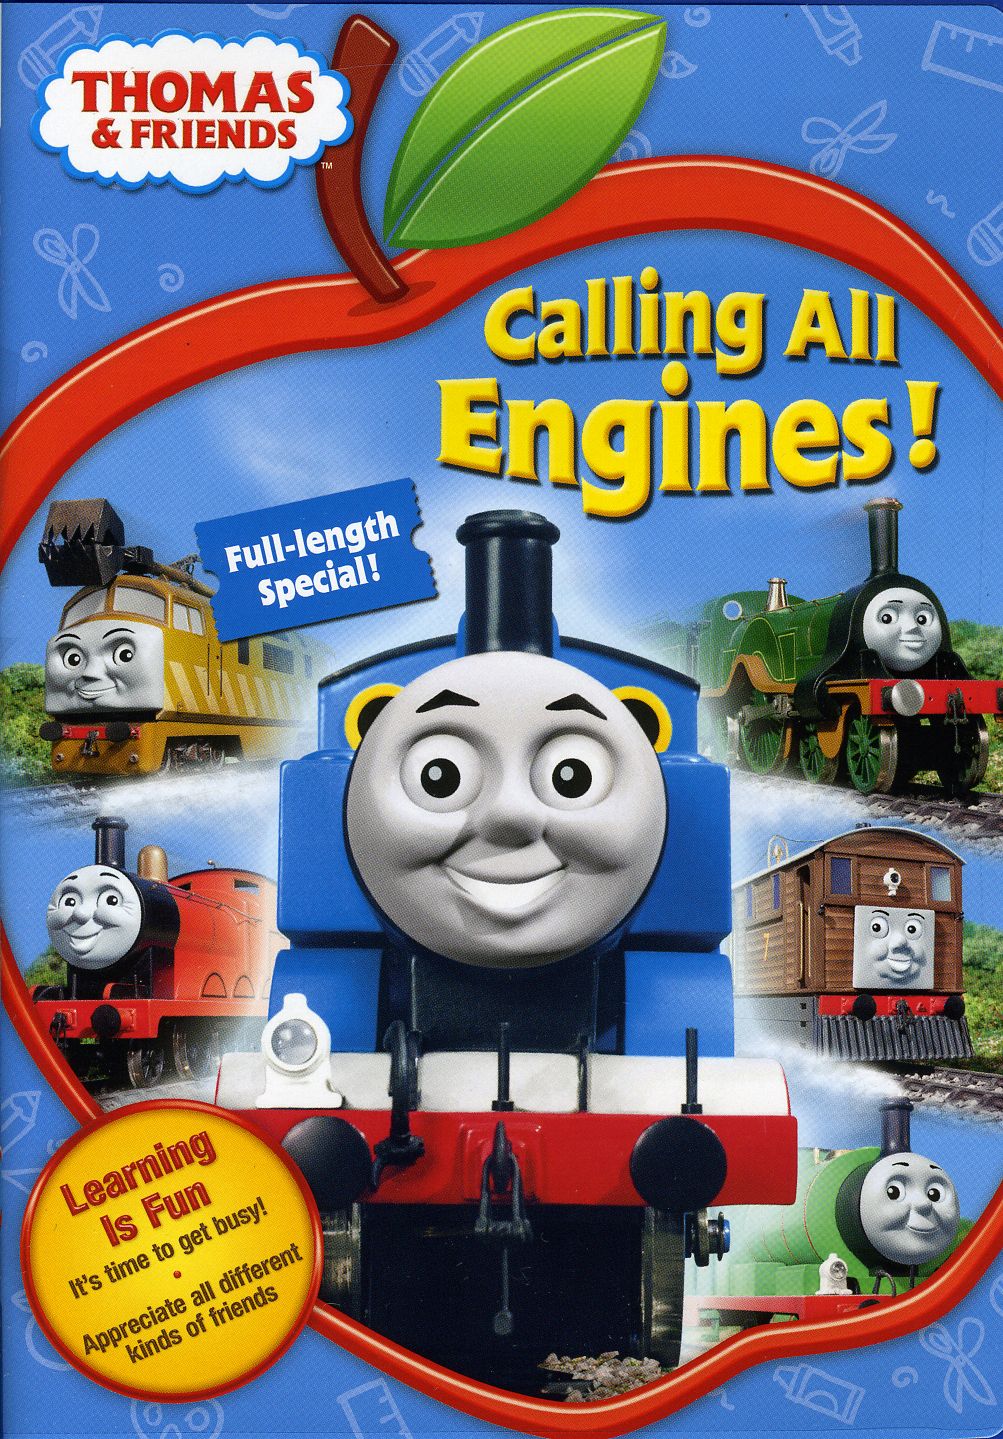 Thomas & Friends Calling All Engines (DVD)